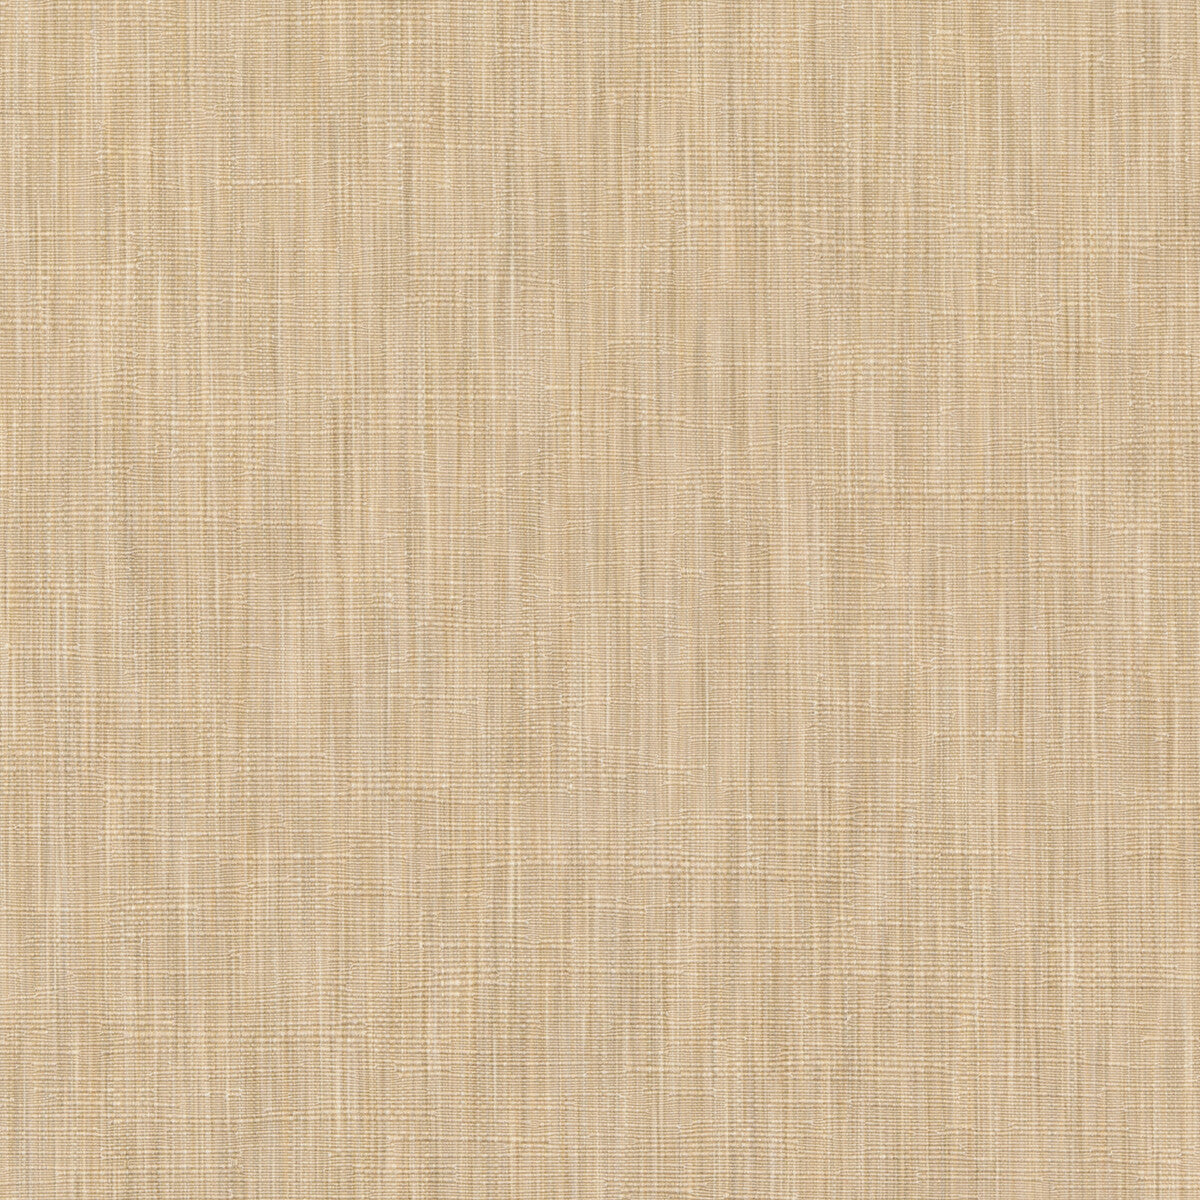 Saverne Texture fabric in wheat color - pattern 8019122.16.0 - by Brunschwig &amp; Fils in the Alsace Weaves collection